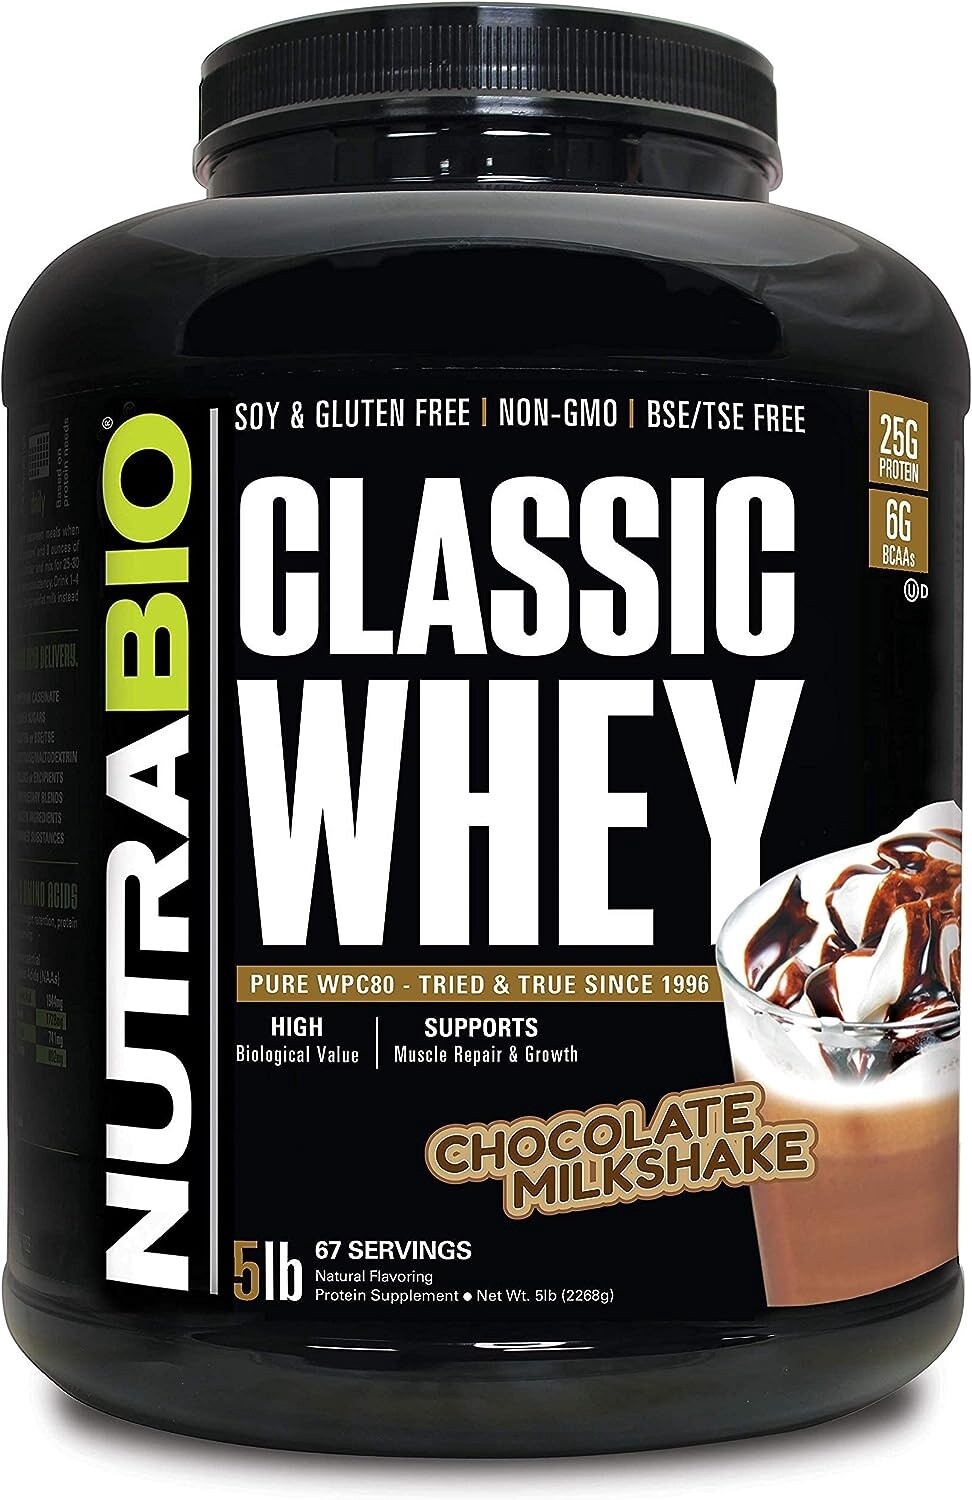 NUTRA BIO Classic Whey Protein - 5 Pounds SALE!! EXP. 12/2024